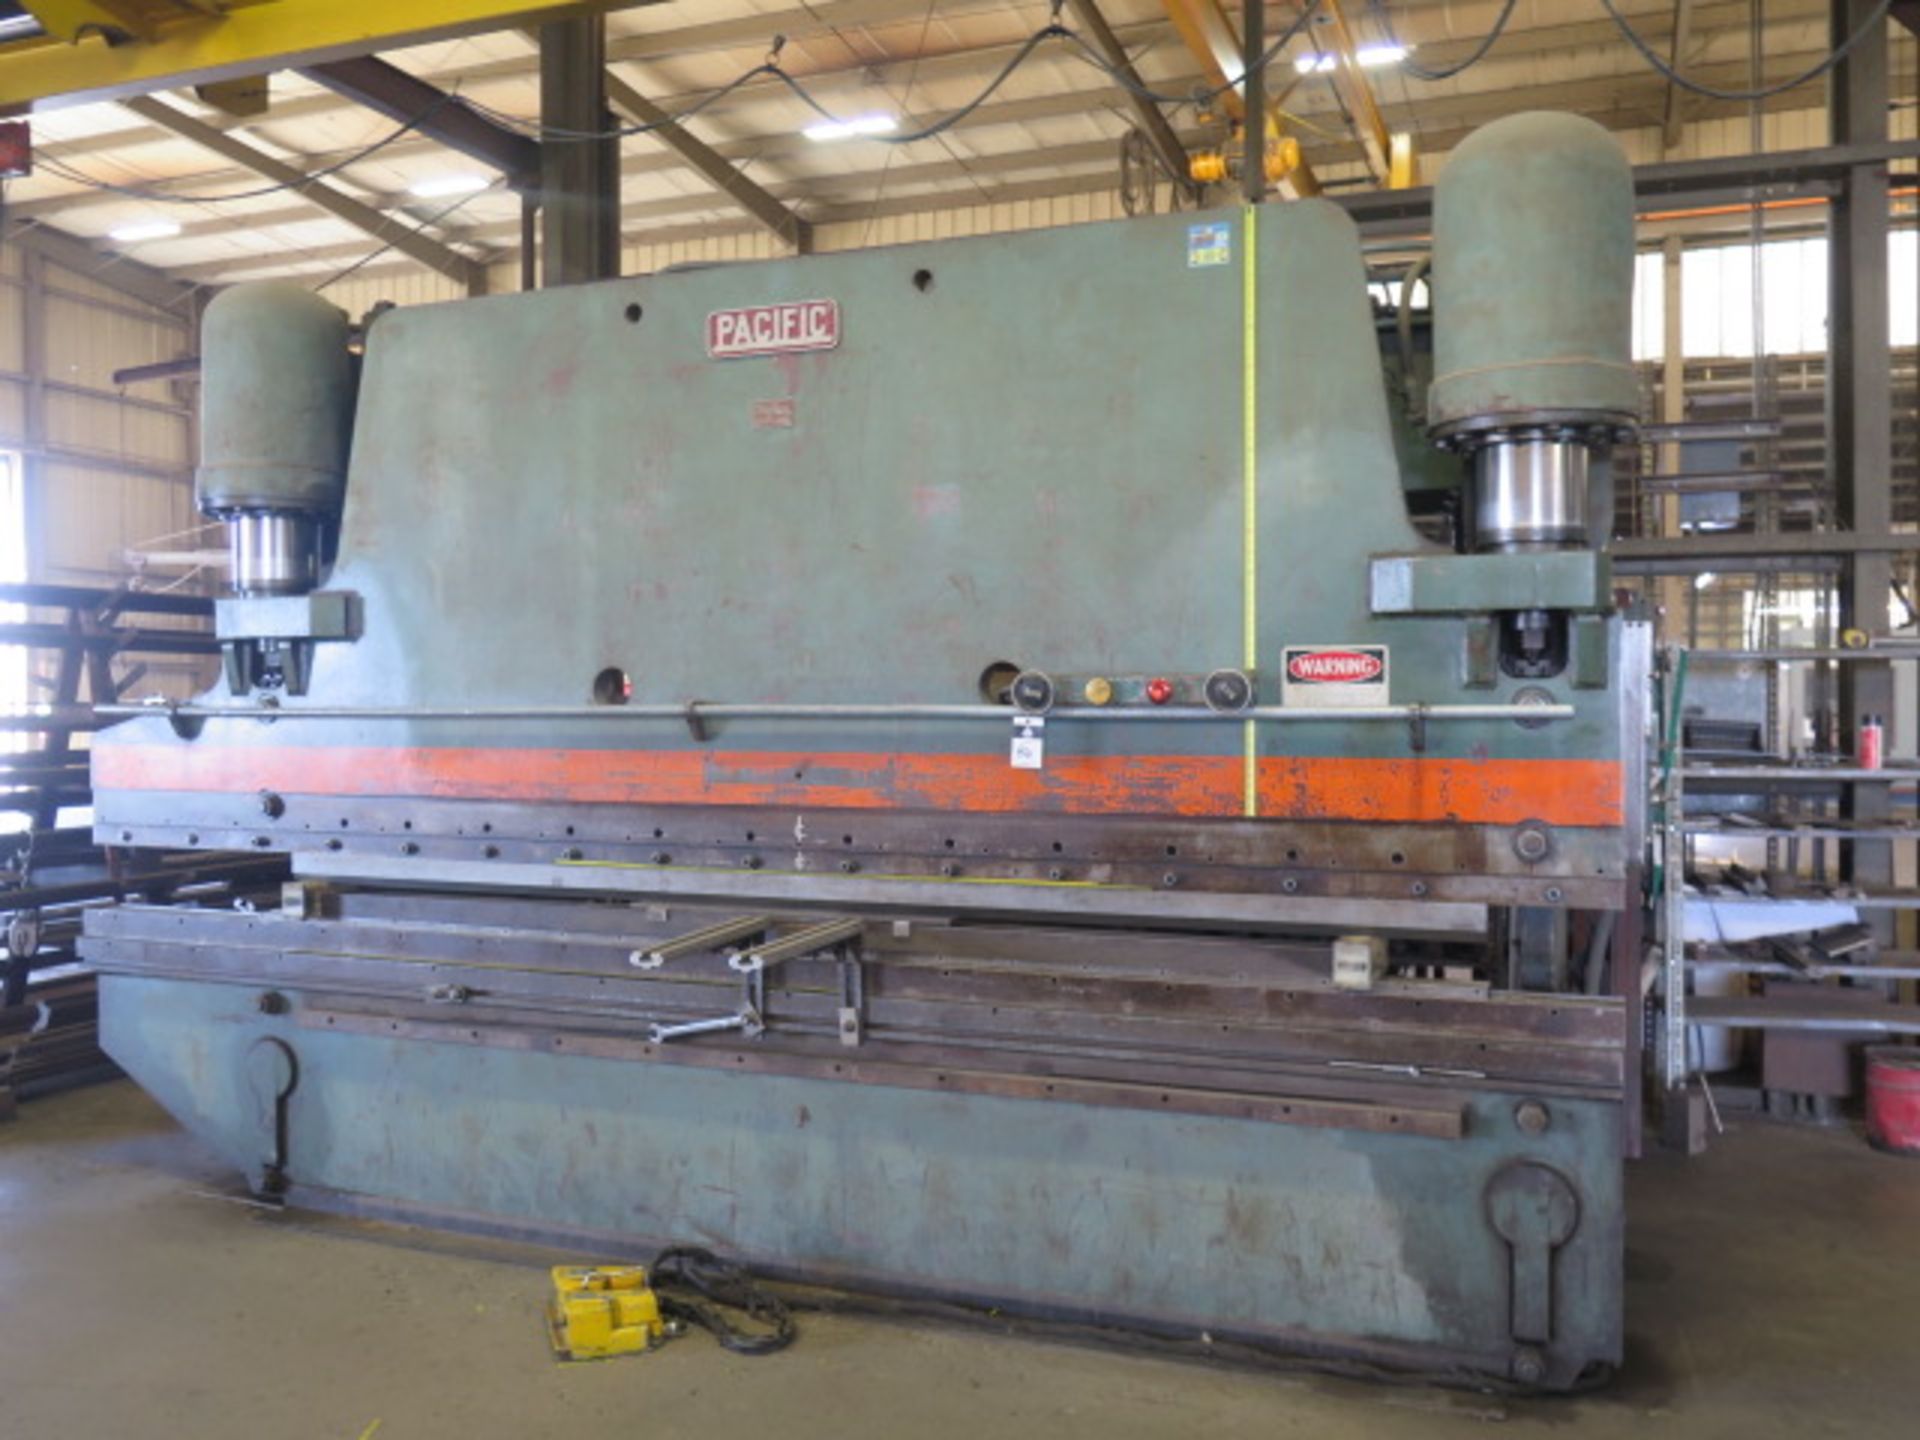 Pacific K300-16 5 1/6” x 14’ Hydraulic Press Brake s/n 6909 w/ 16’ Bed Length, SOLD AS IS - Image 2 of 16